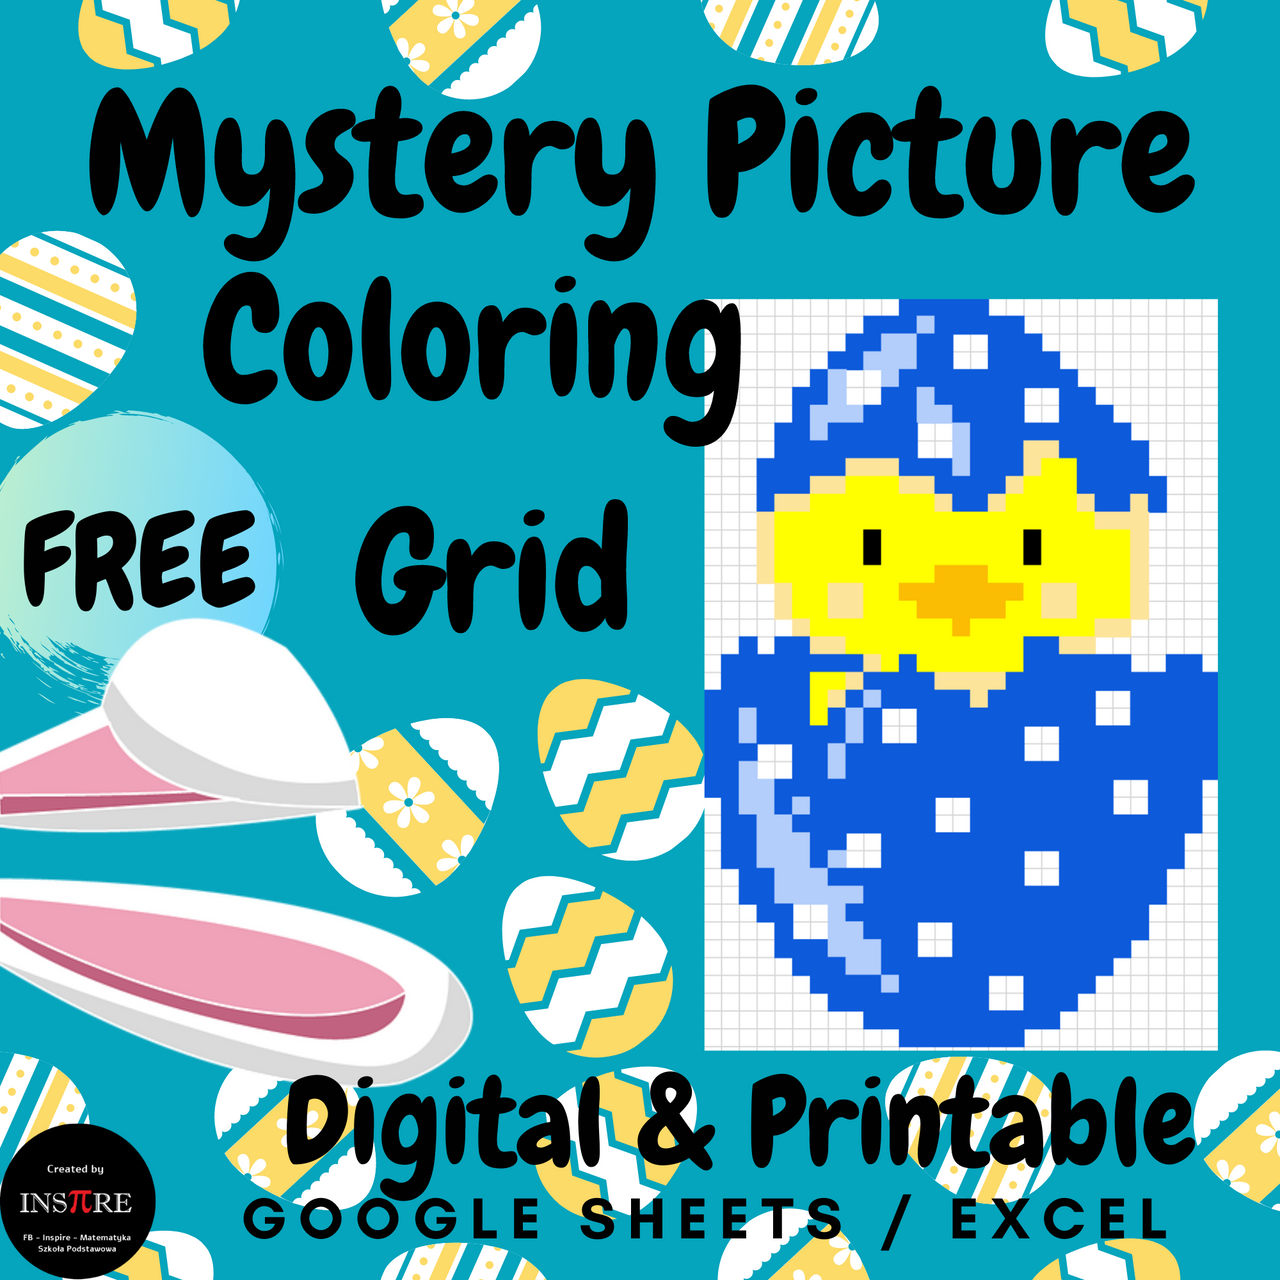 FREE Coding Easter Egg Mystery Picture - Coloring Grid Page Printable & Digital